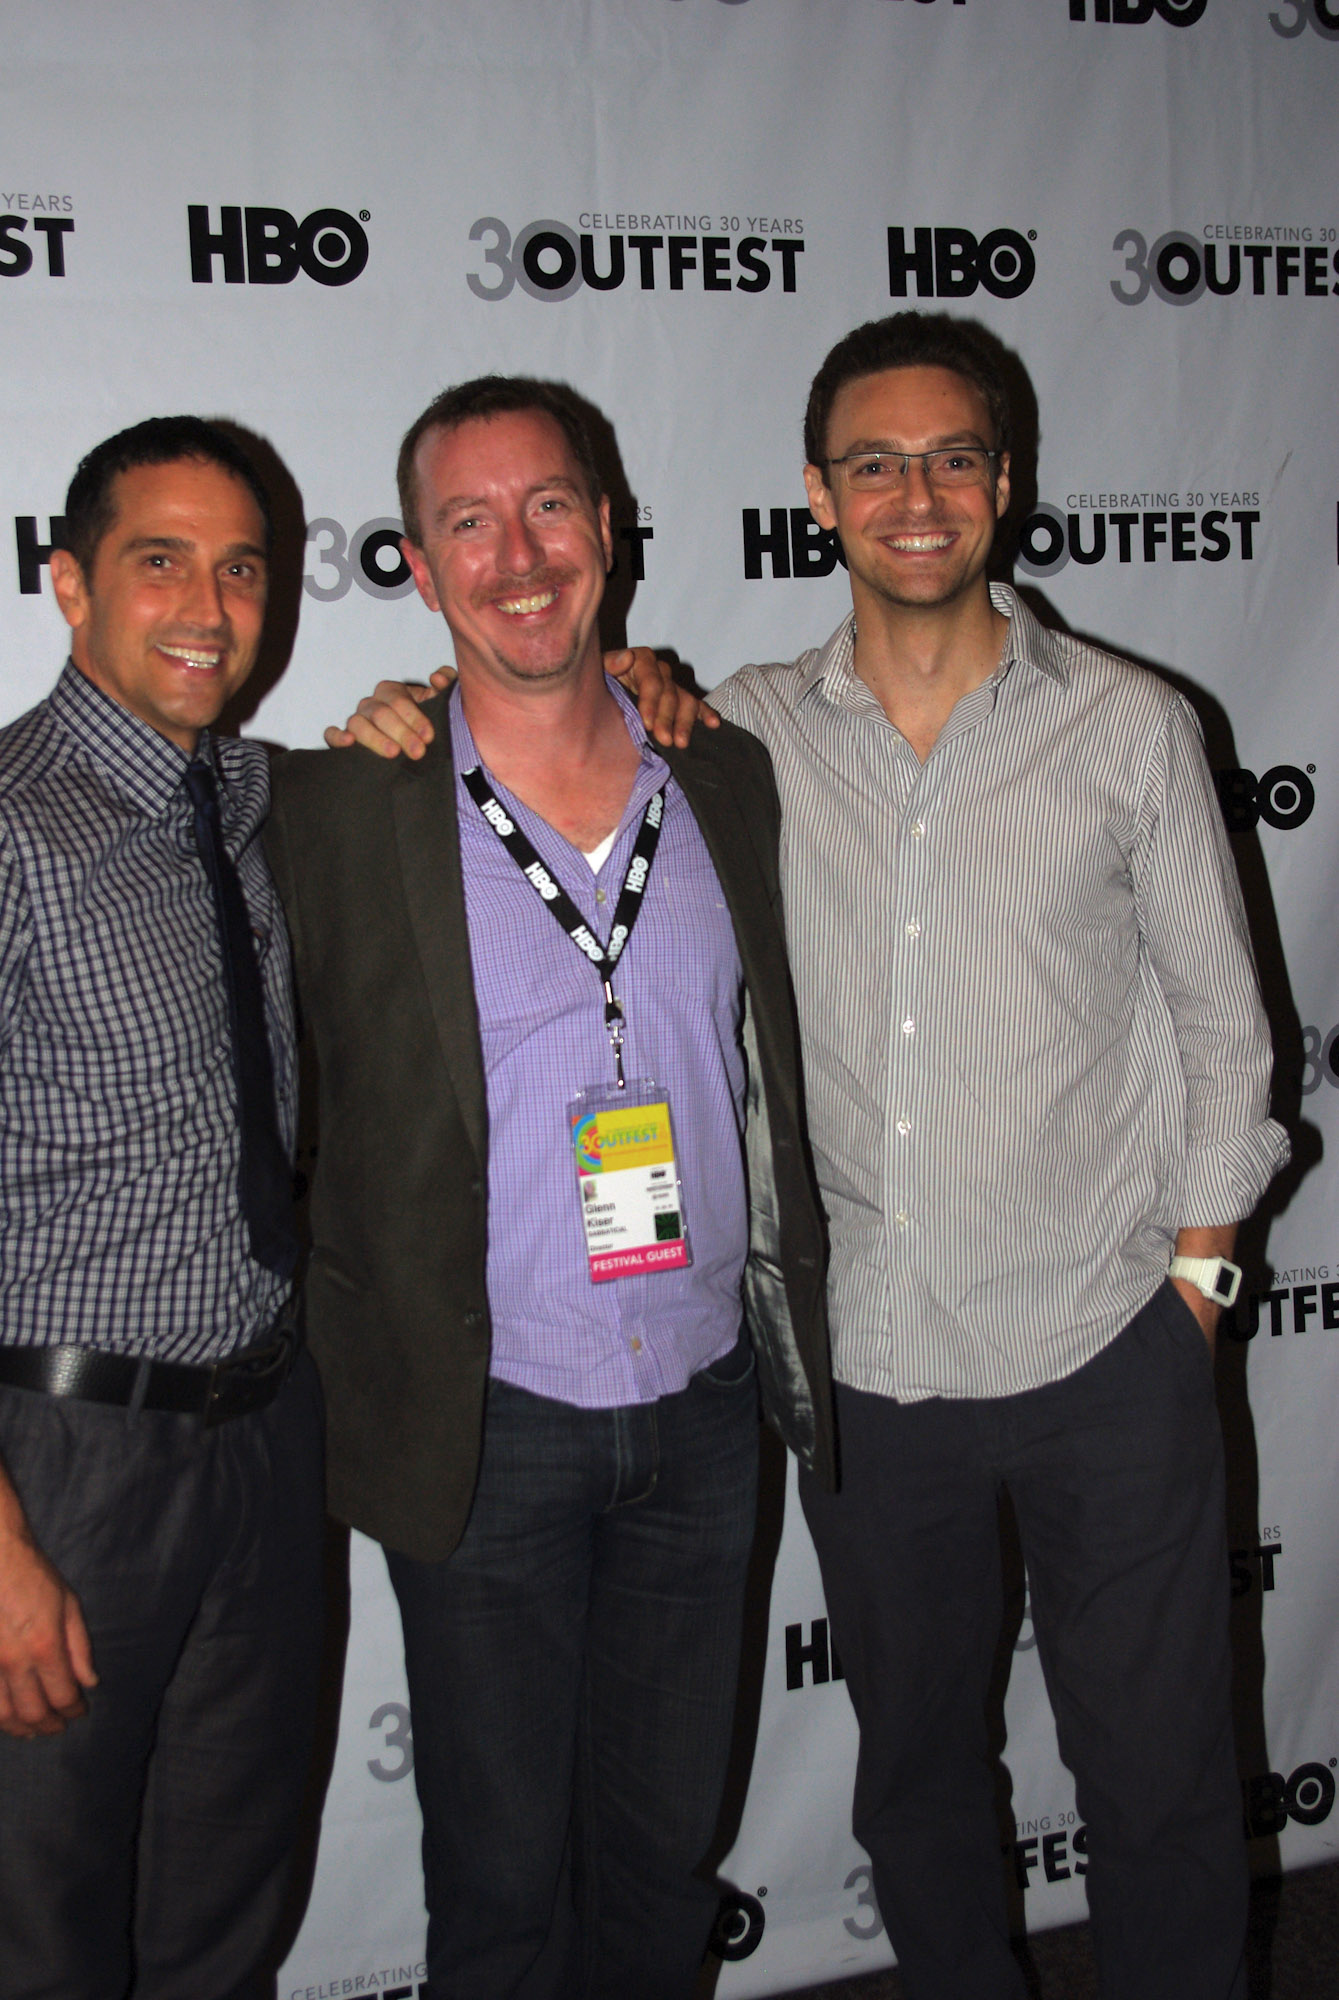 Outfest 2012. Screening Sabbatical. Left to Right- Actor: Shane Alexander; Director: Glenn Kiser, Actor: Ross Marquand